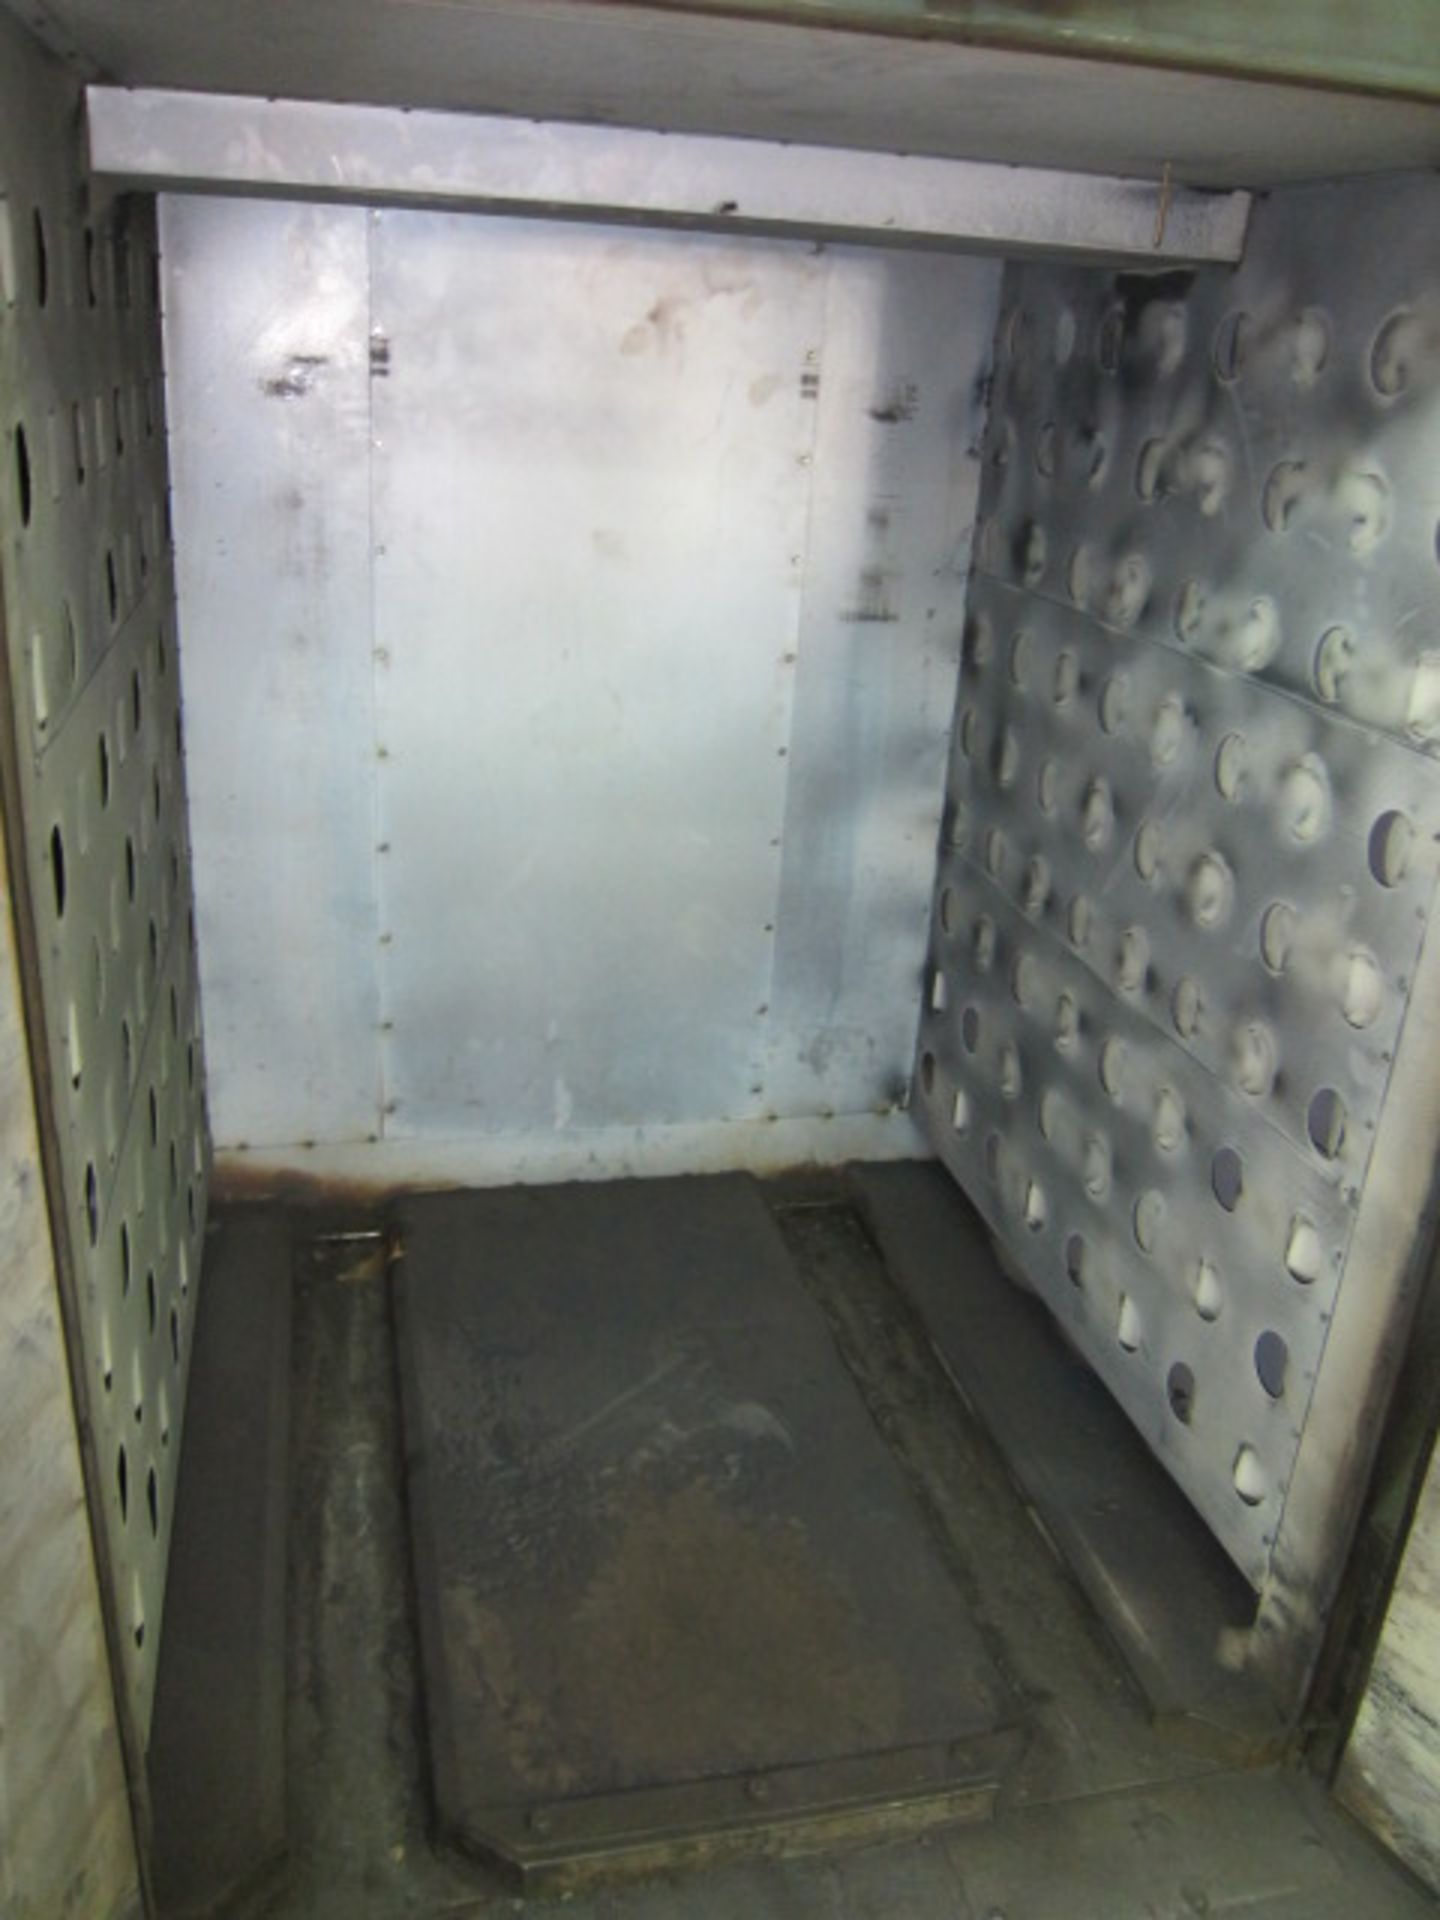 CABINET BAKE OVEN, GRIEVE MDL. TBH-500, 350 deg. F. max. temp., 2-door design, gas fired, S/N - Image 6 of 6